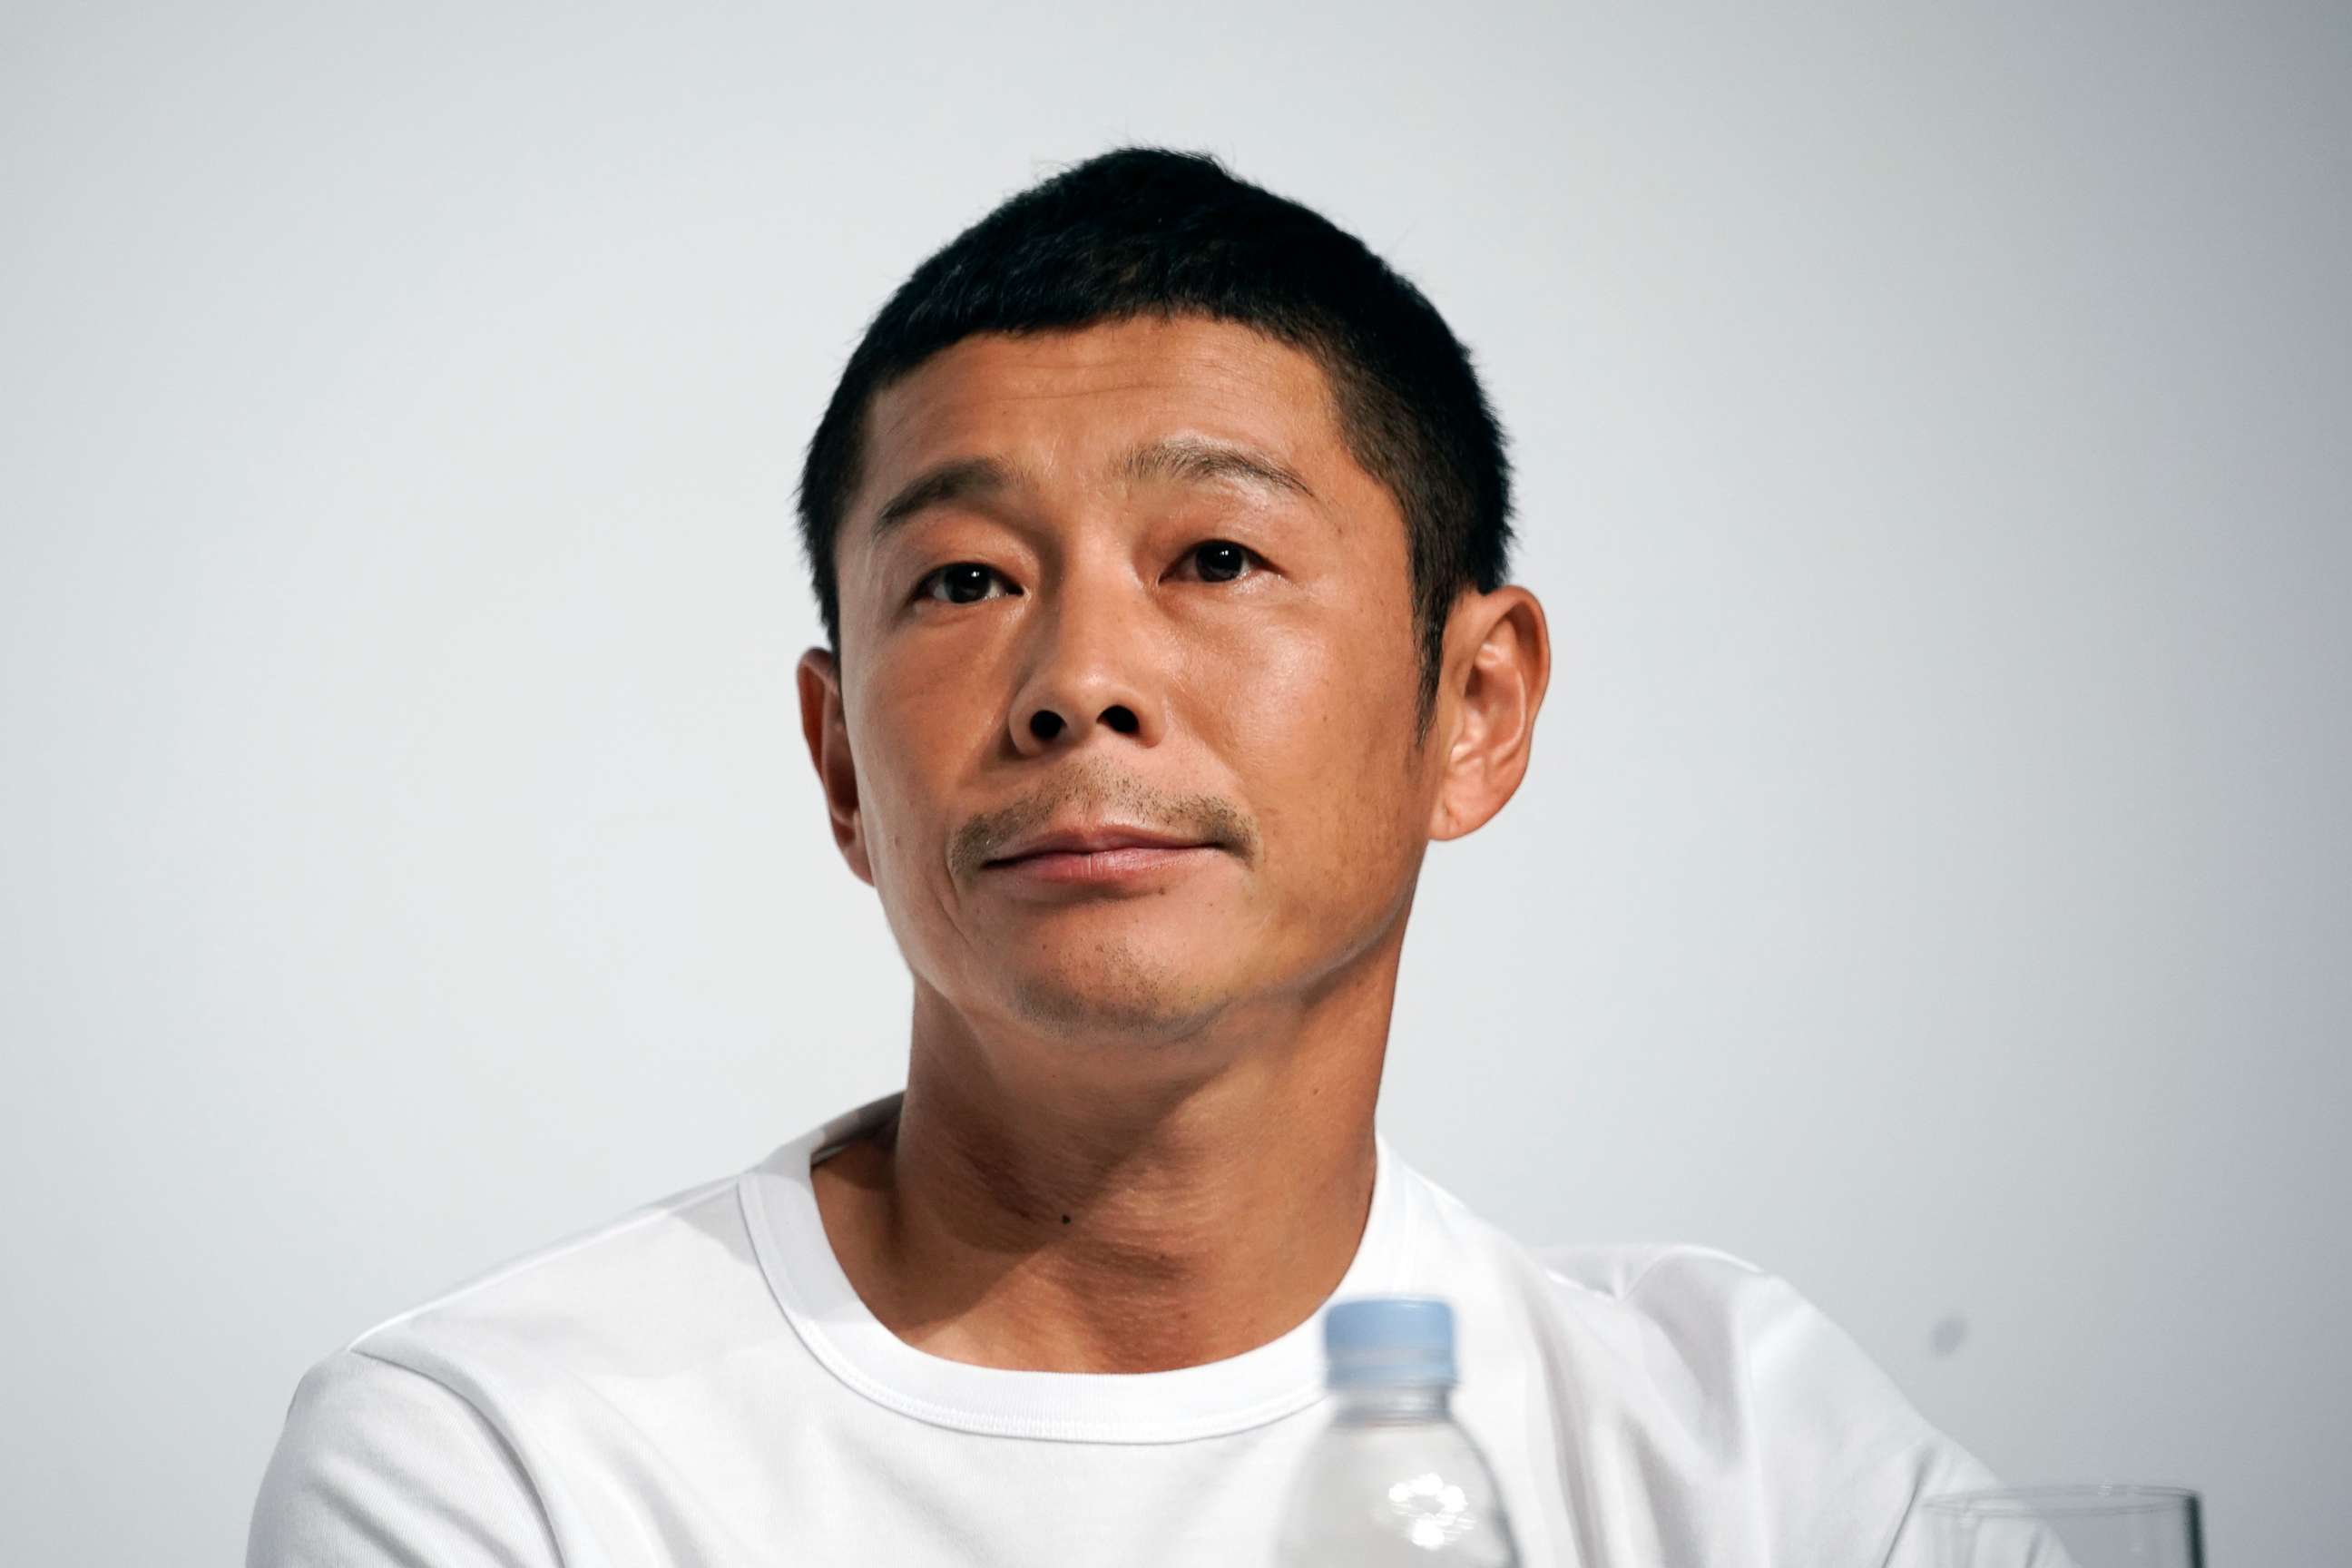 PHOTO: Zozo founder Yusaku Maezawa attends a news conference, Sept. 12, 2019, in Tokyo.